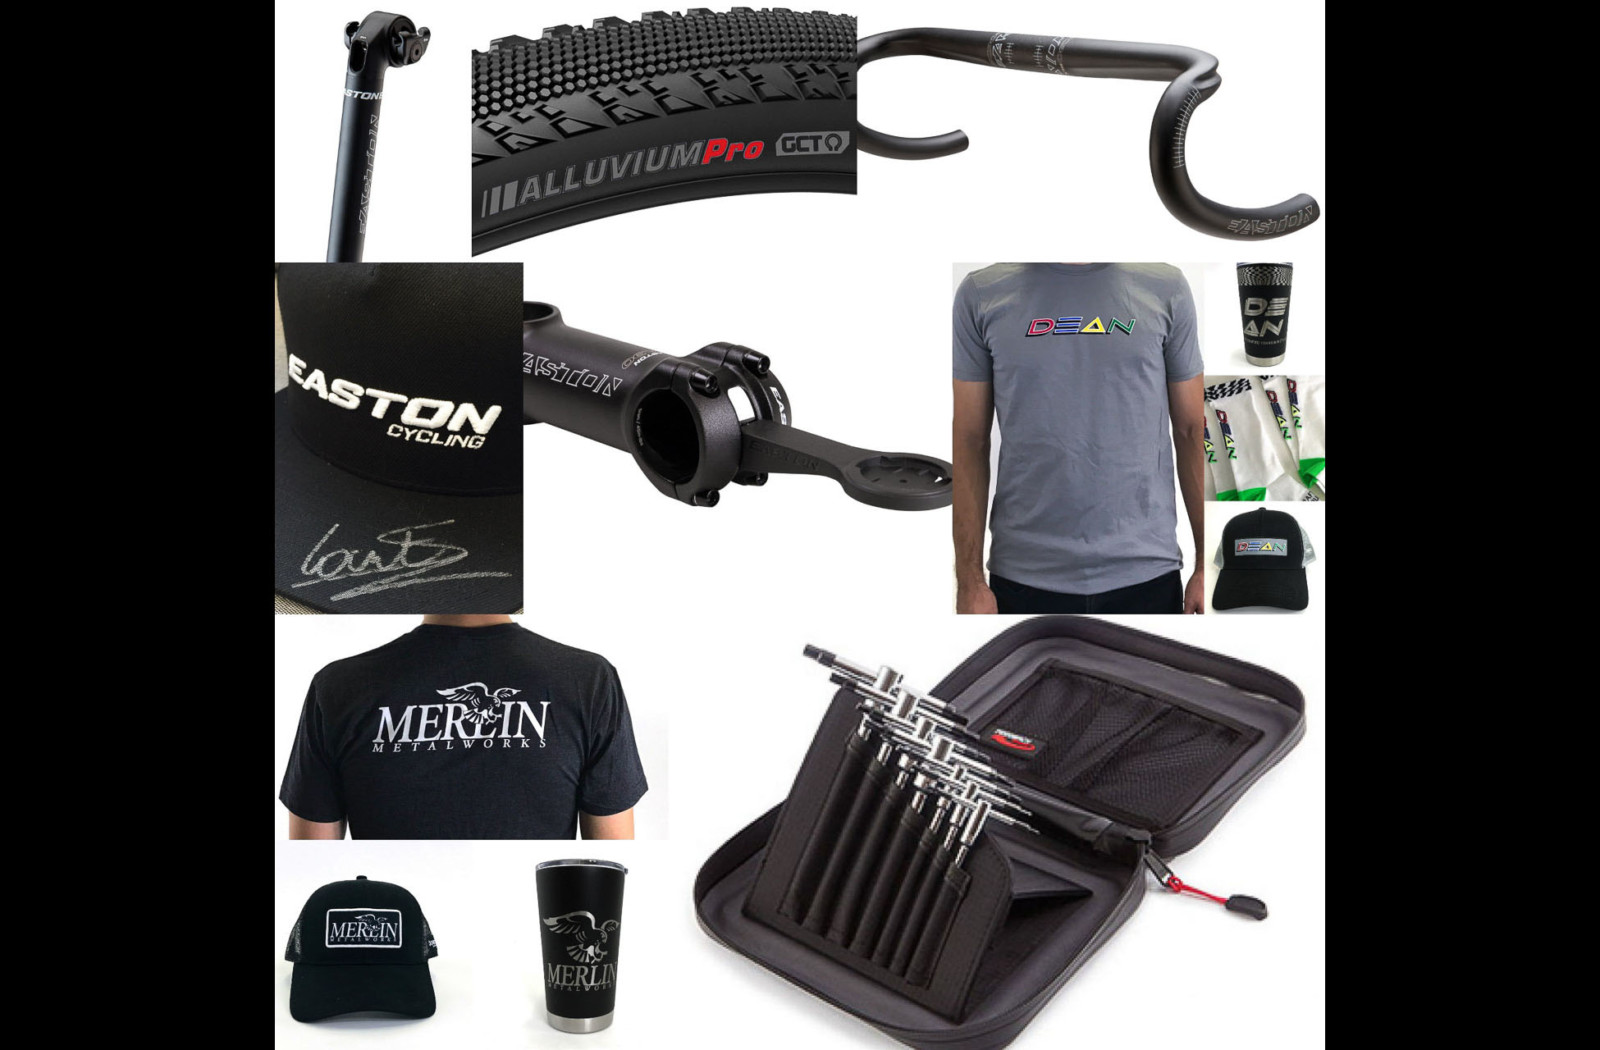 There's a whole lot of loot from Easton, Feedback Sports, Kenda, Merlin and Dean available to Cyclocross Magazine's Fantasy Worlds game winners.